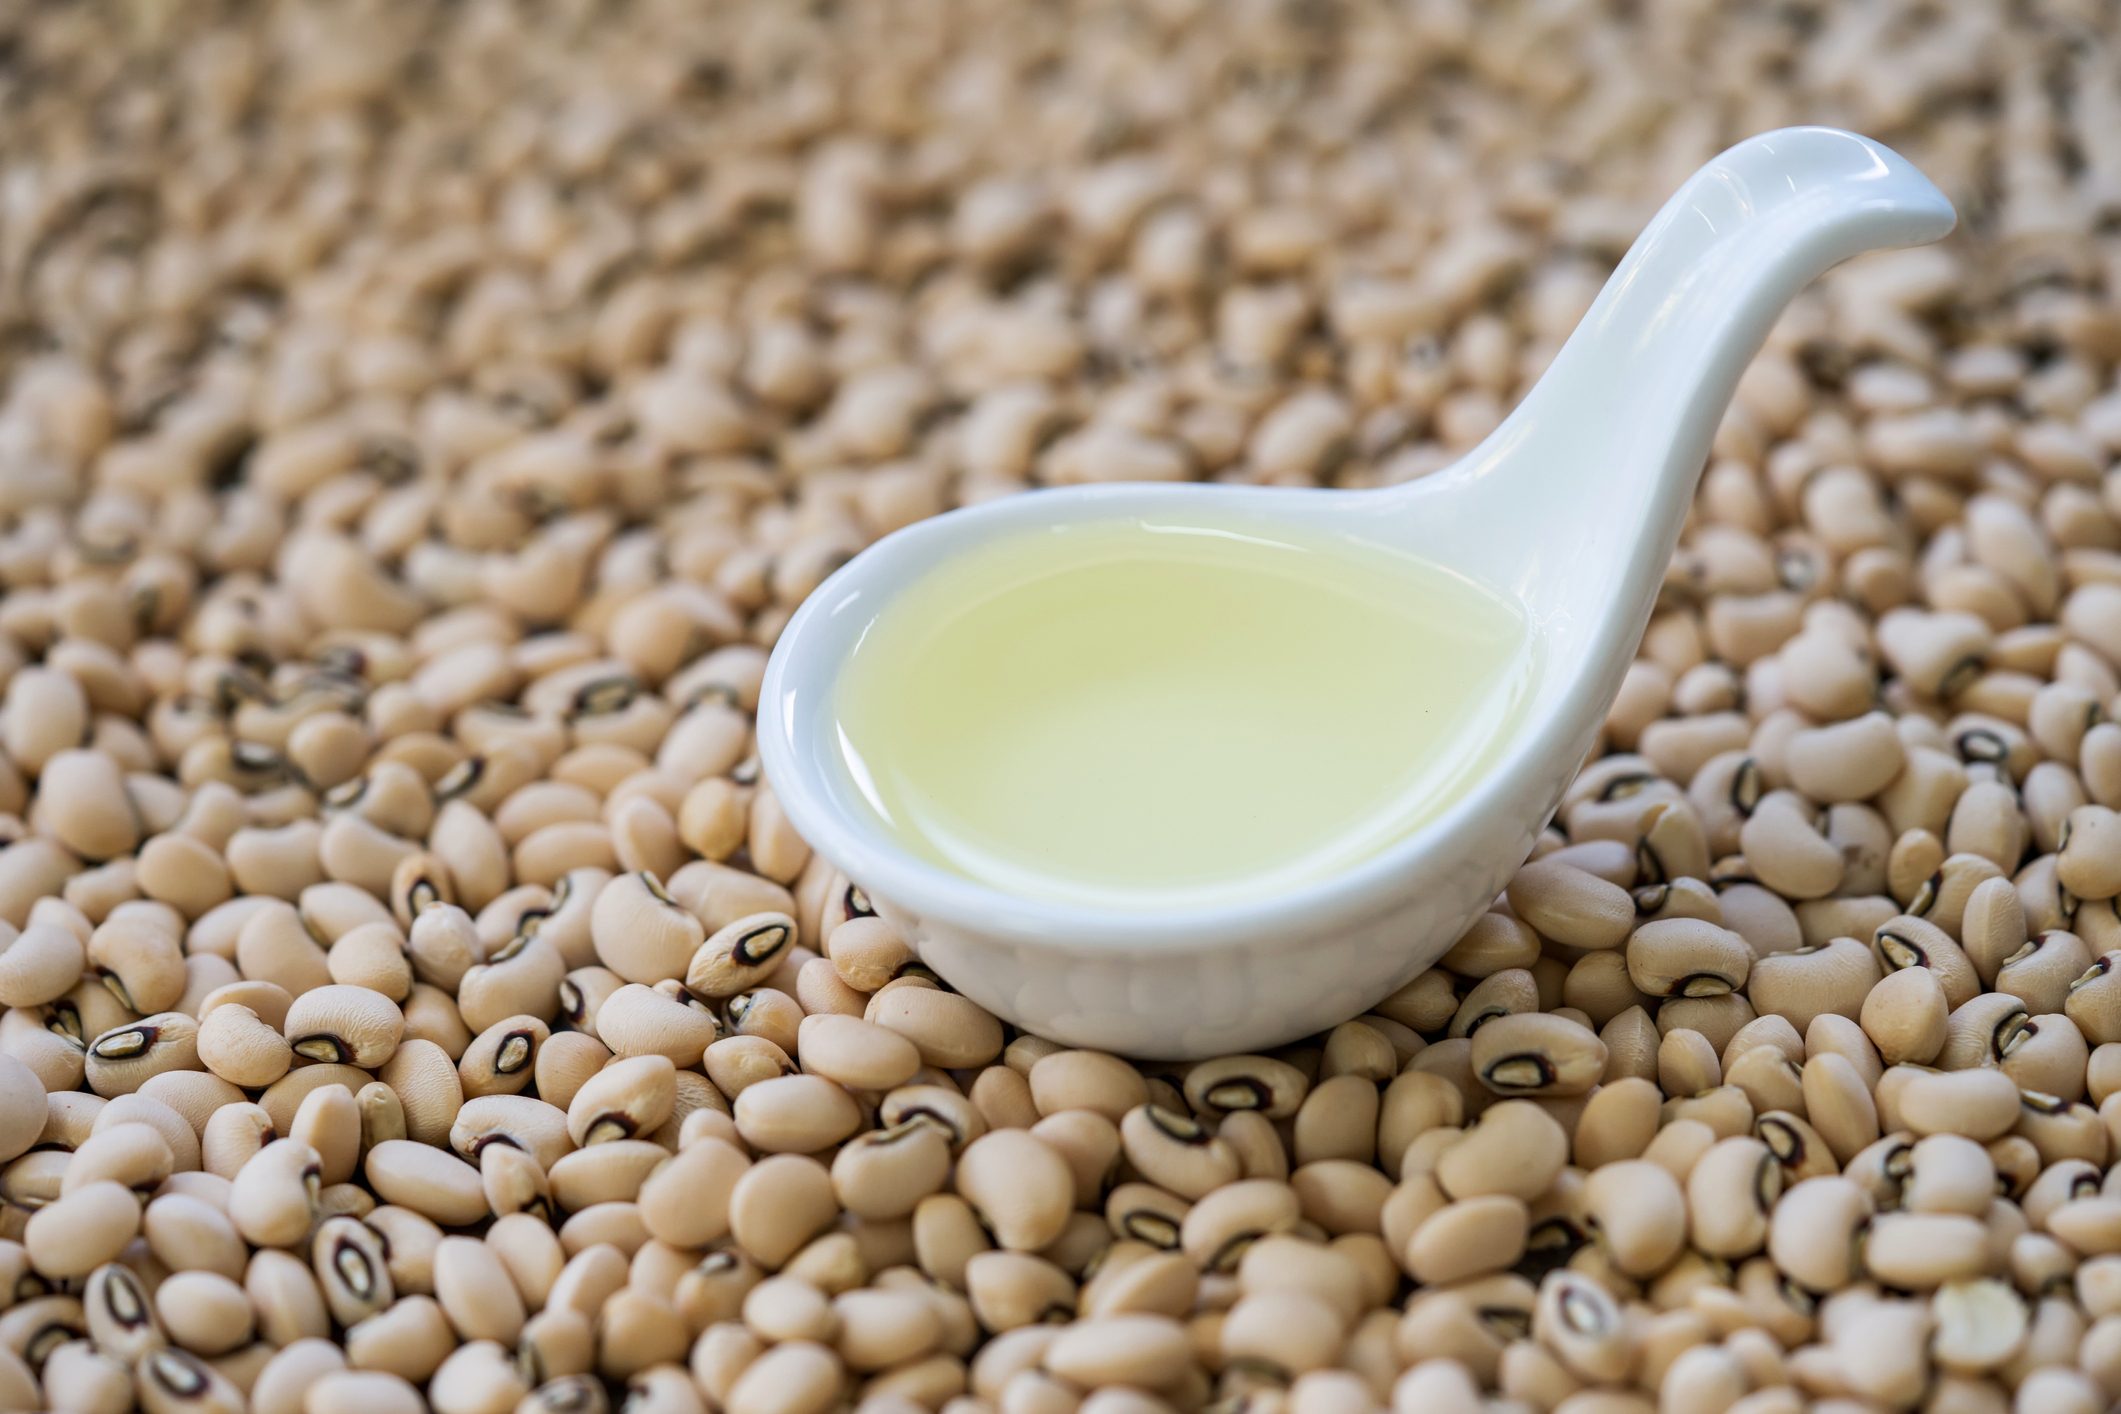 Is Soybean Oil Bad for You? 10 Nutrition Facts You Should Know